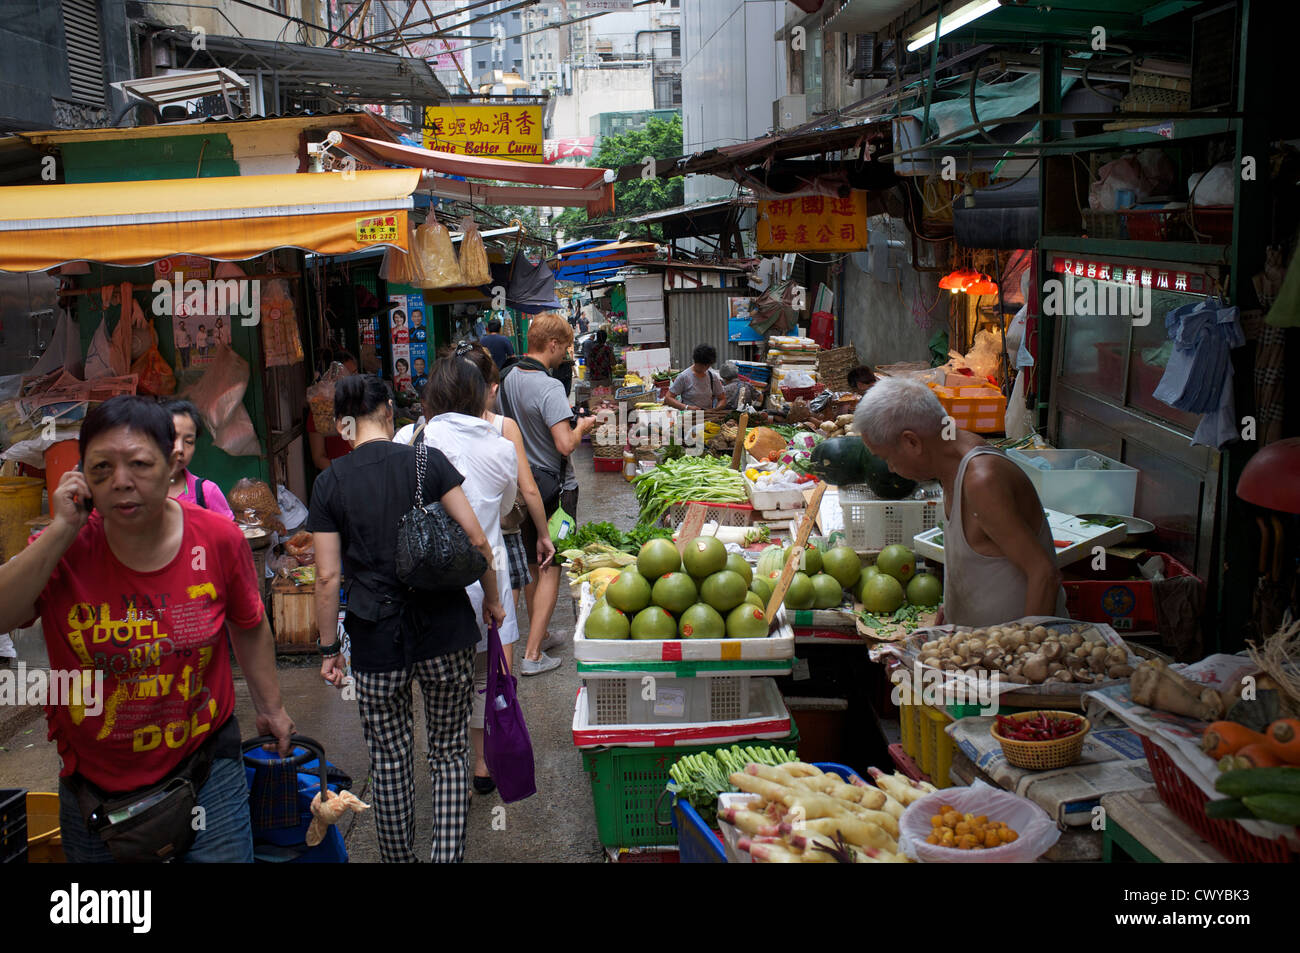 Food market in Central Hong Kong. 28-Aug-2012 Stock Photo